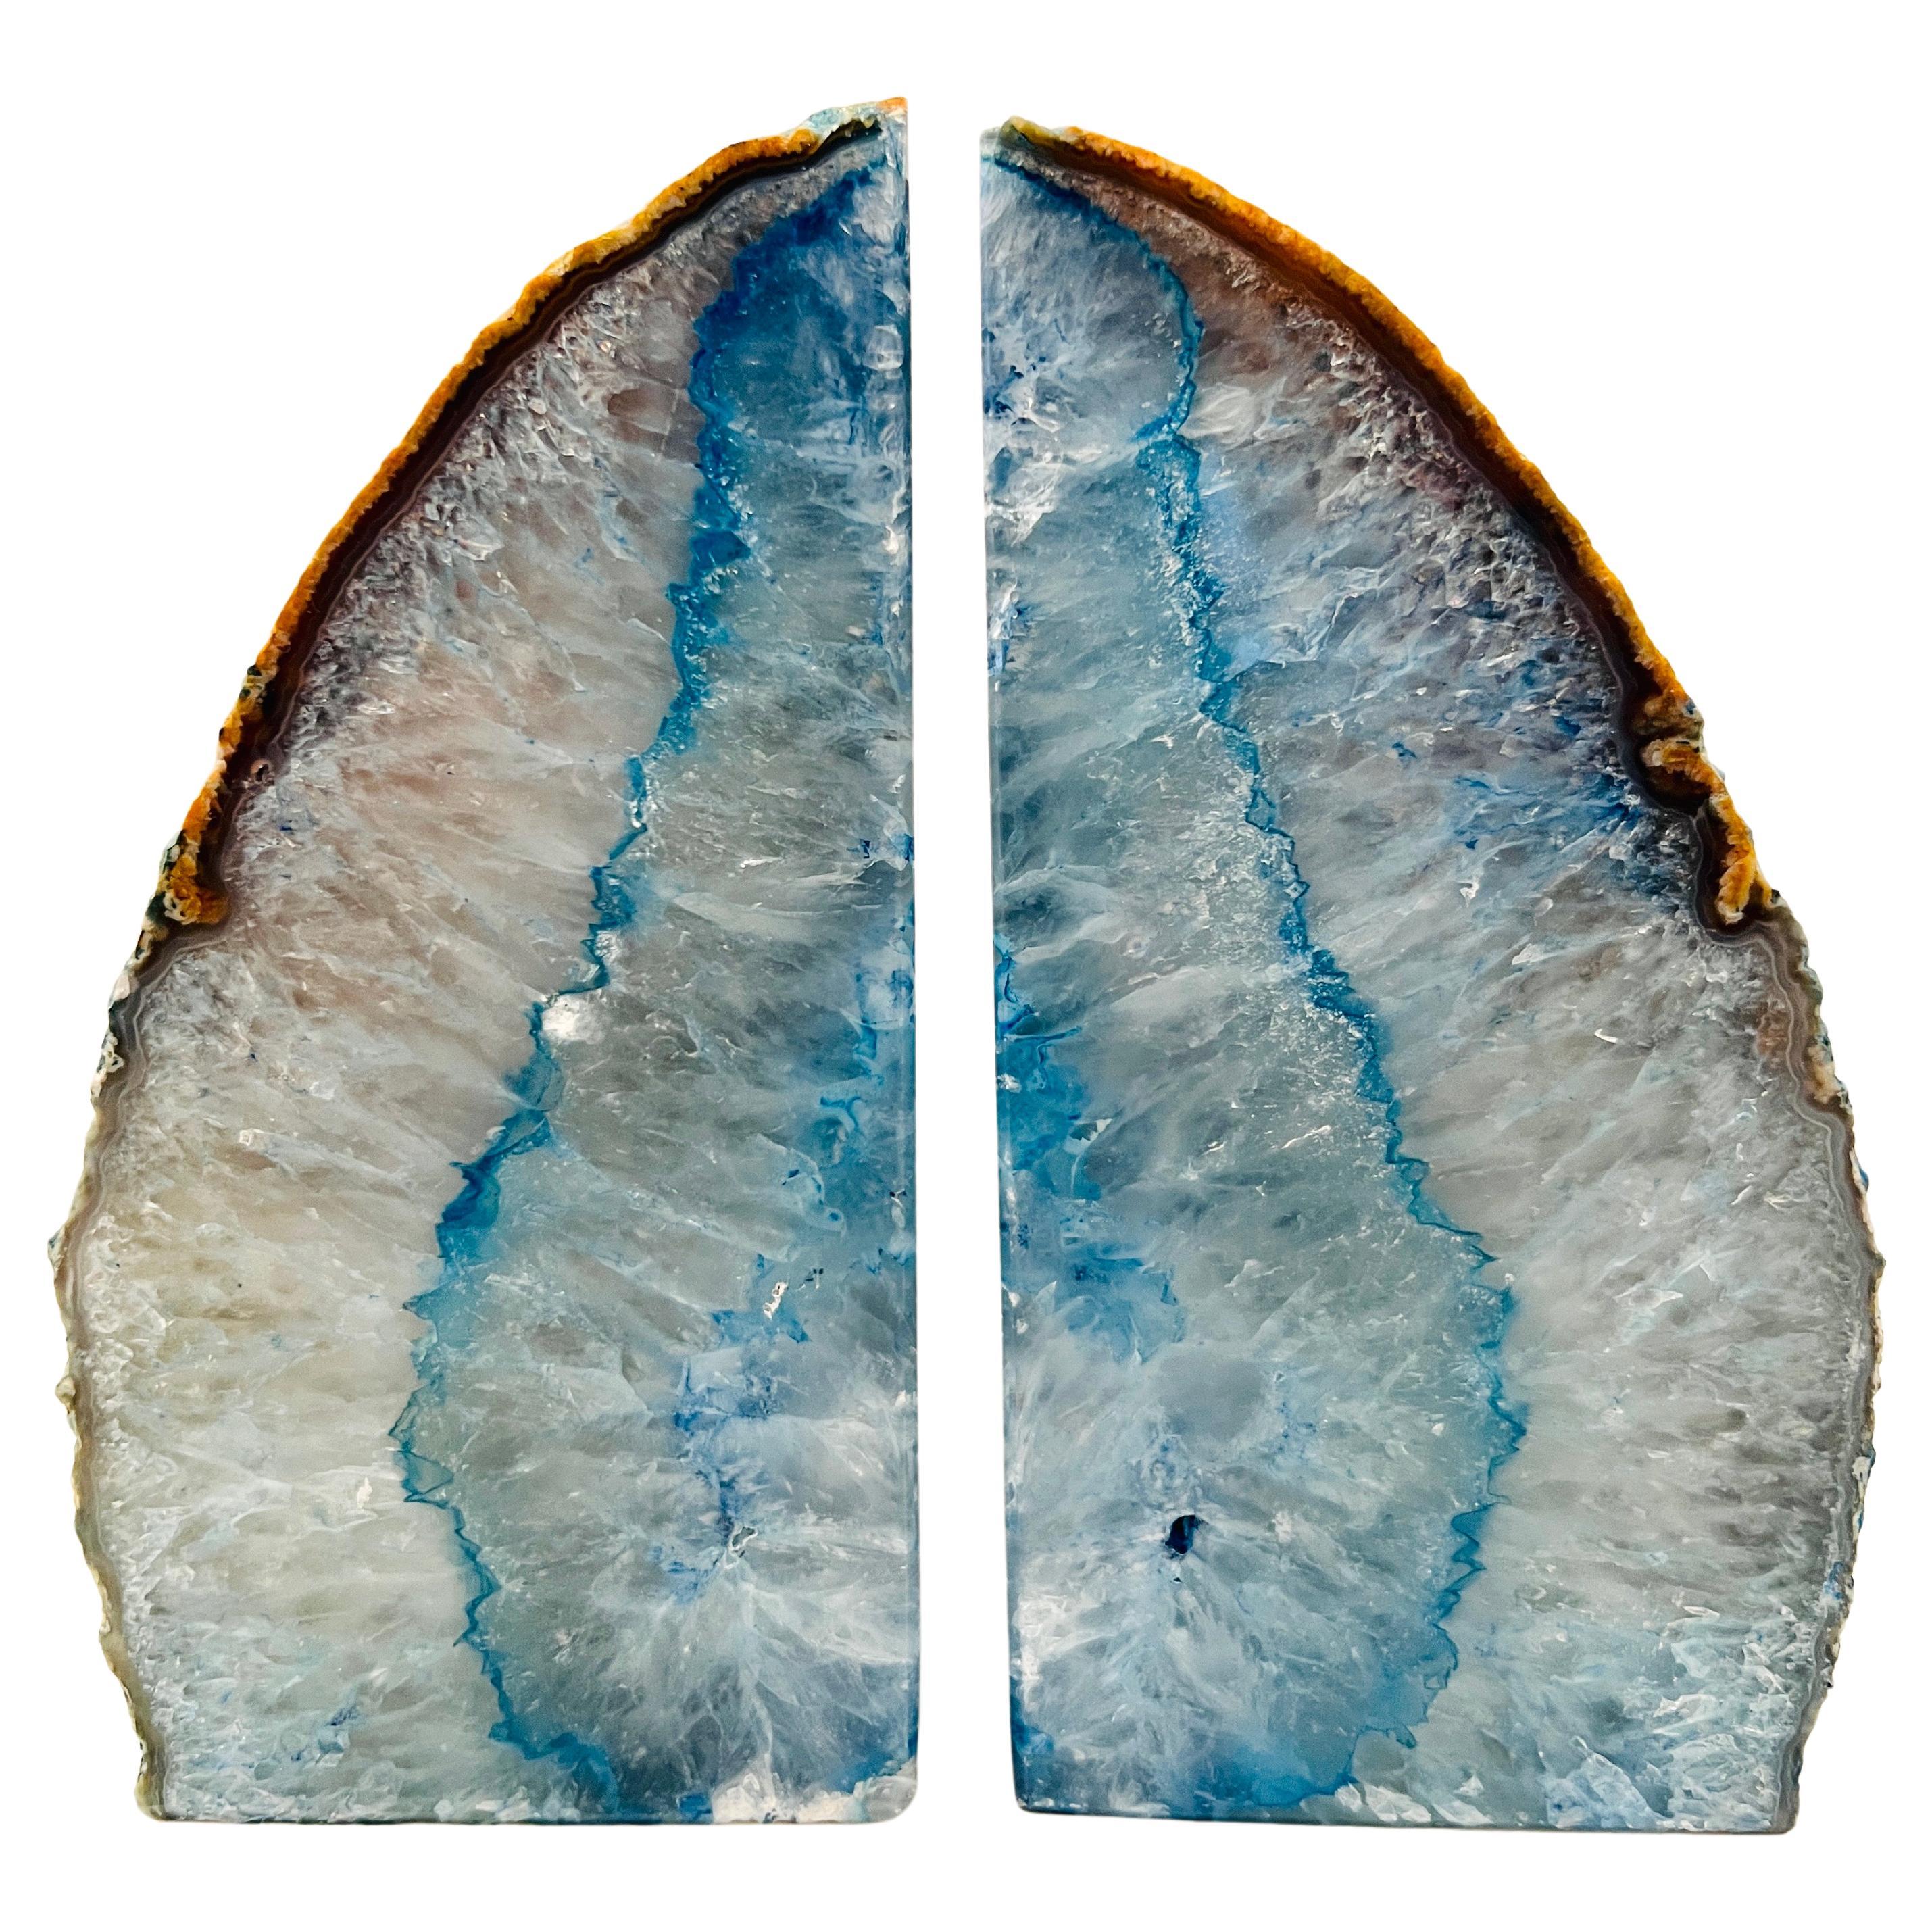 Pair of Quartz Crystal Geode Bookends in Blue and White